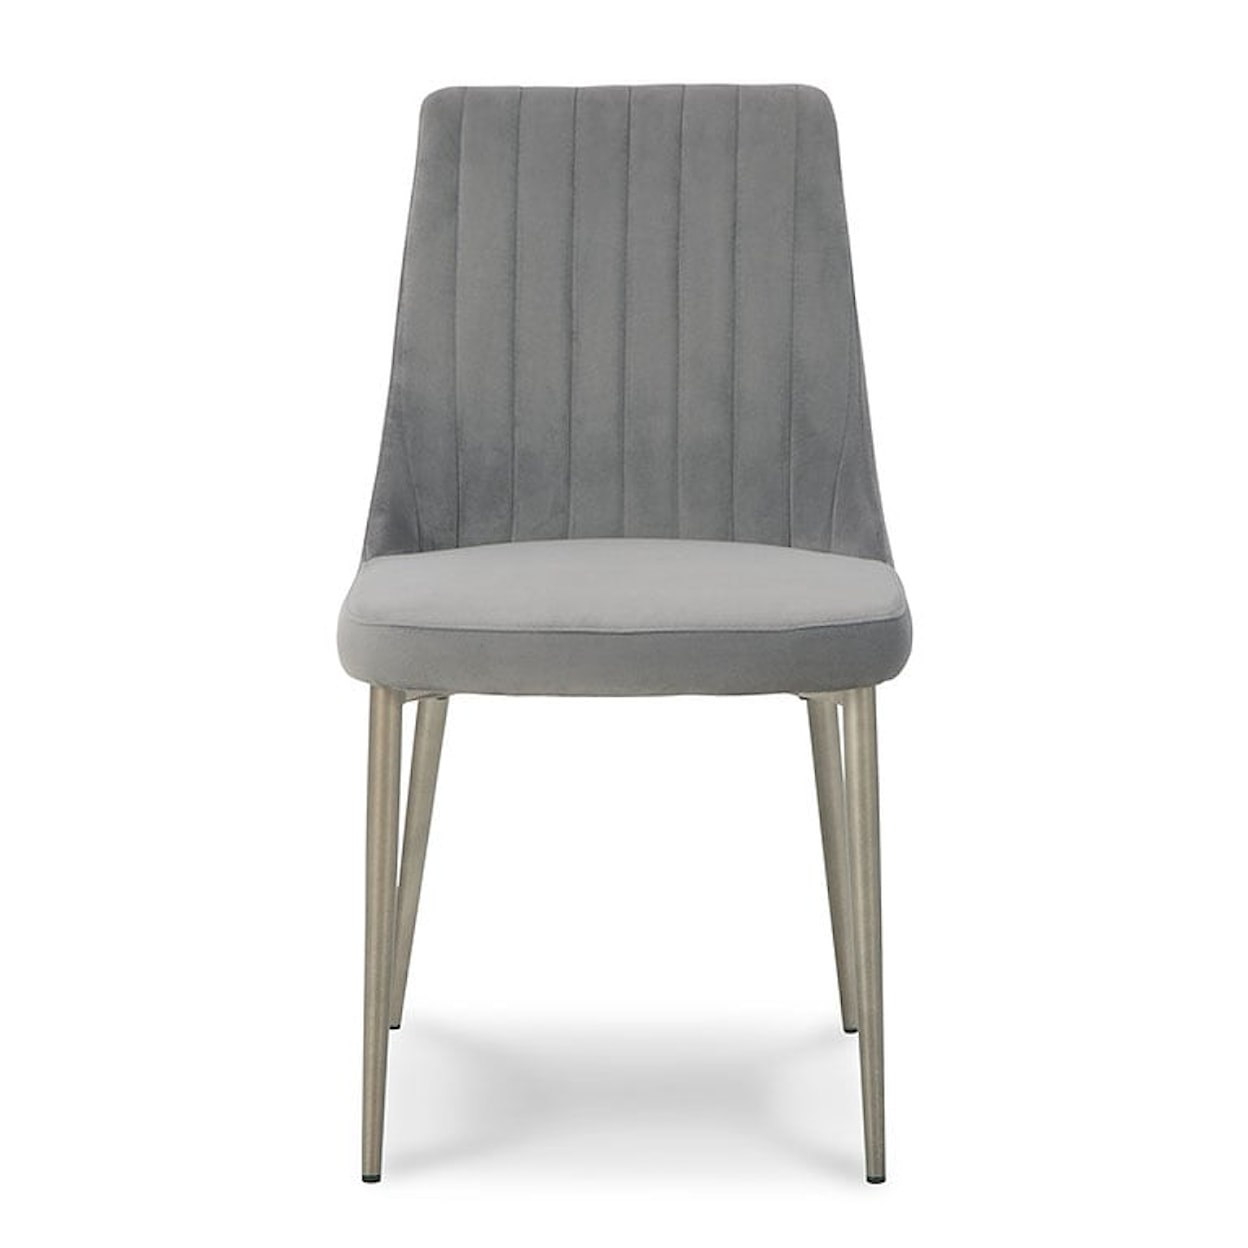 Ashley Furniture Signature Design Barchoni Upholstered Dining Side Chair